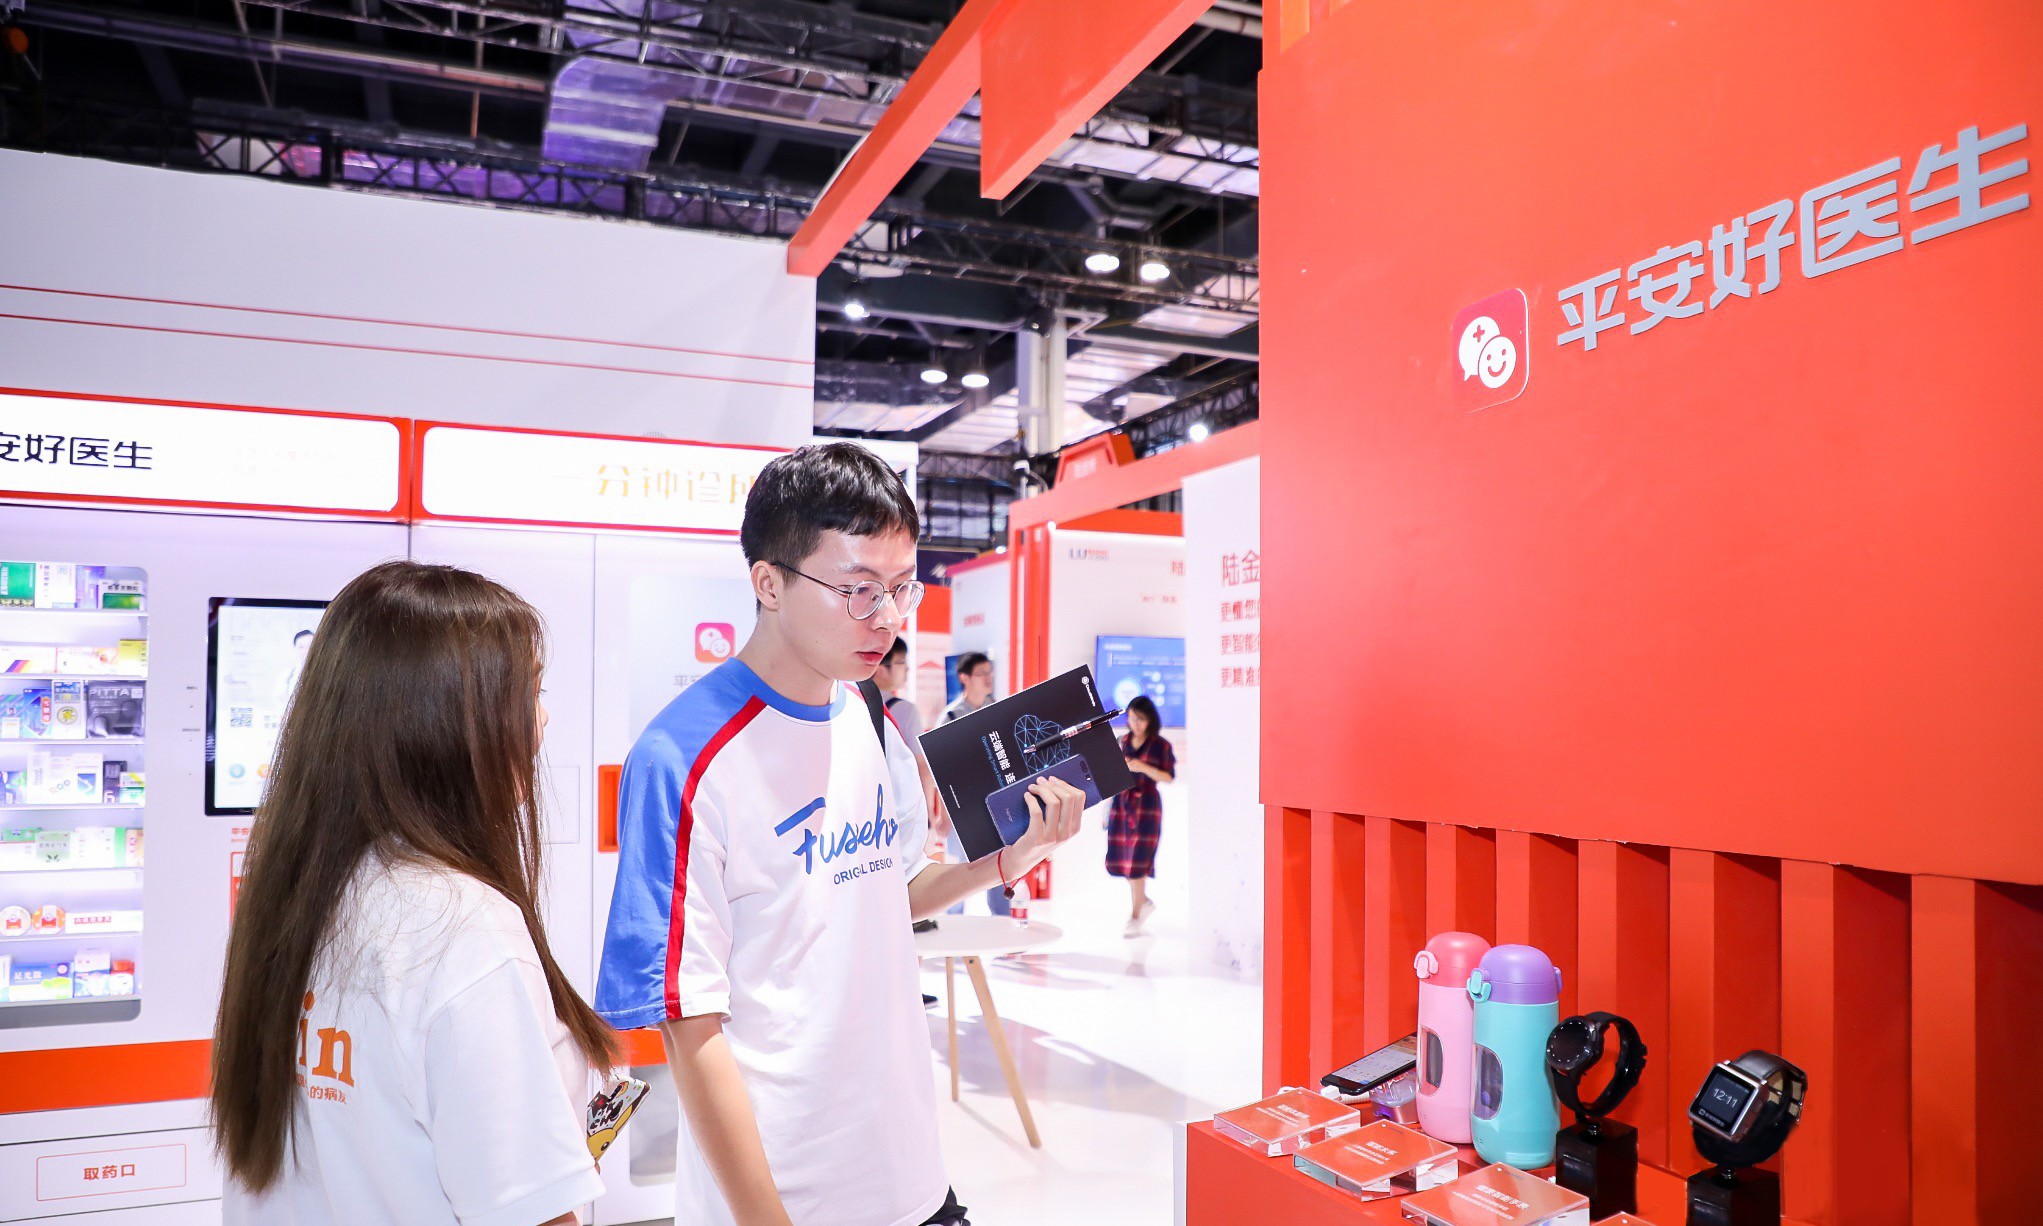 Visitors to the World Artificial Intelligence Conference in Shanghai checking out smart gadgets displayed by Ping An Good Doctor on August 29, 2019. Photo: SCMP/Handout